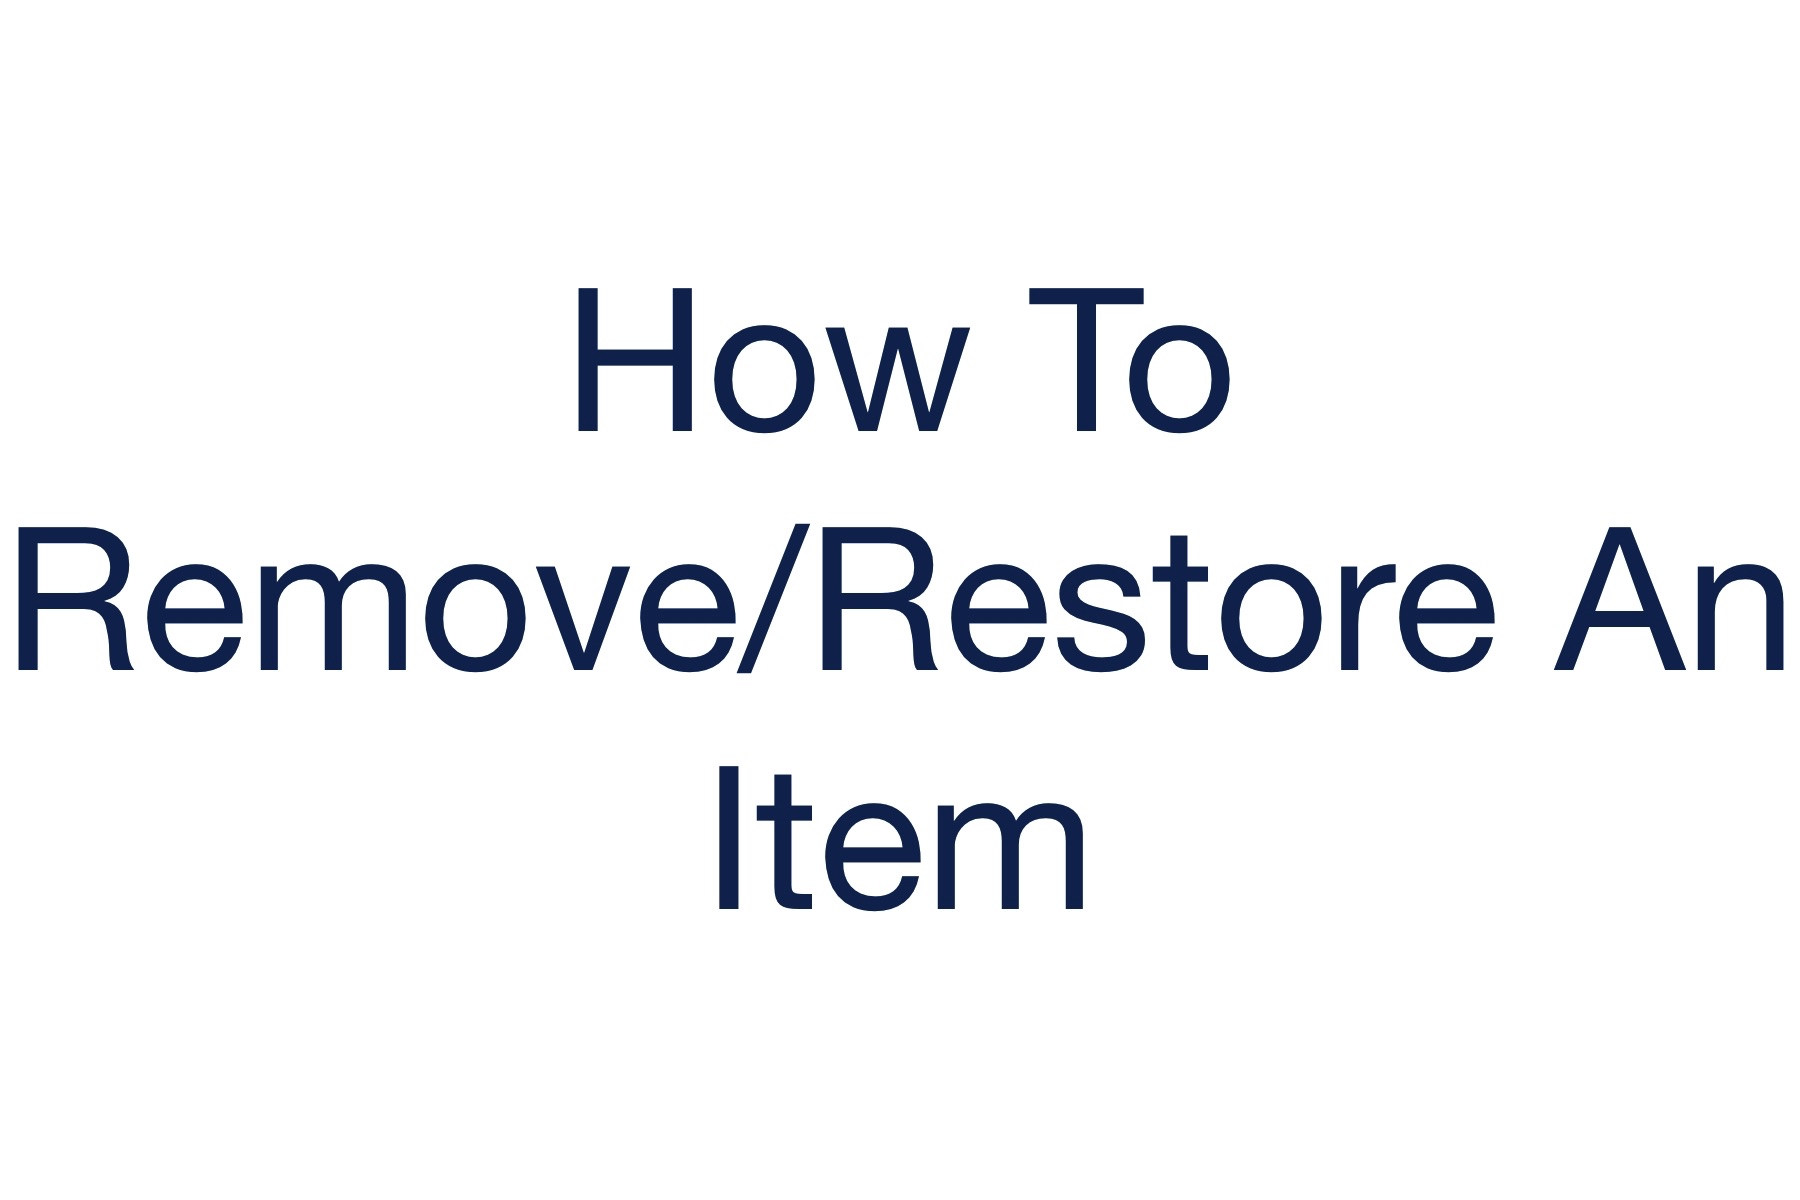 How to remove or restore an item in the Remembered app.